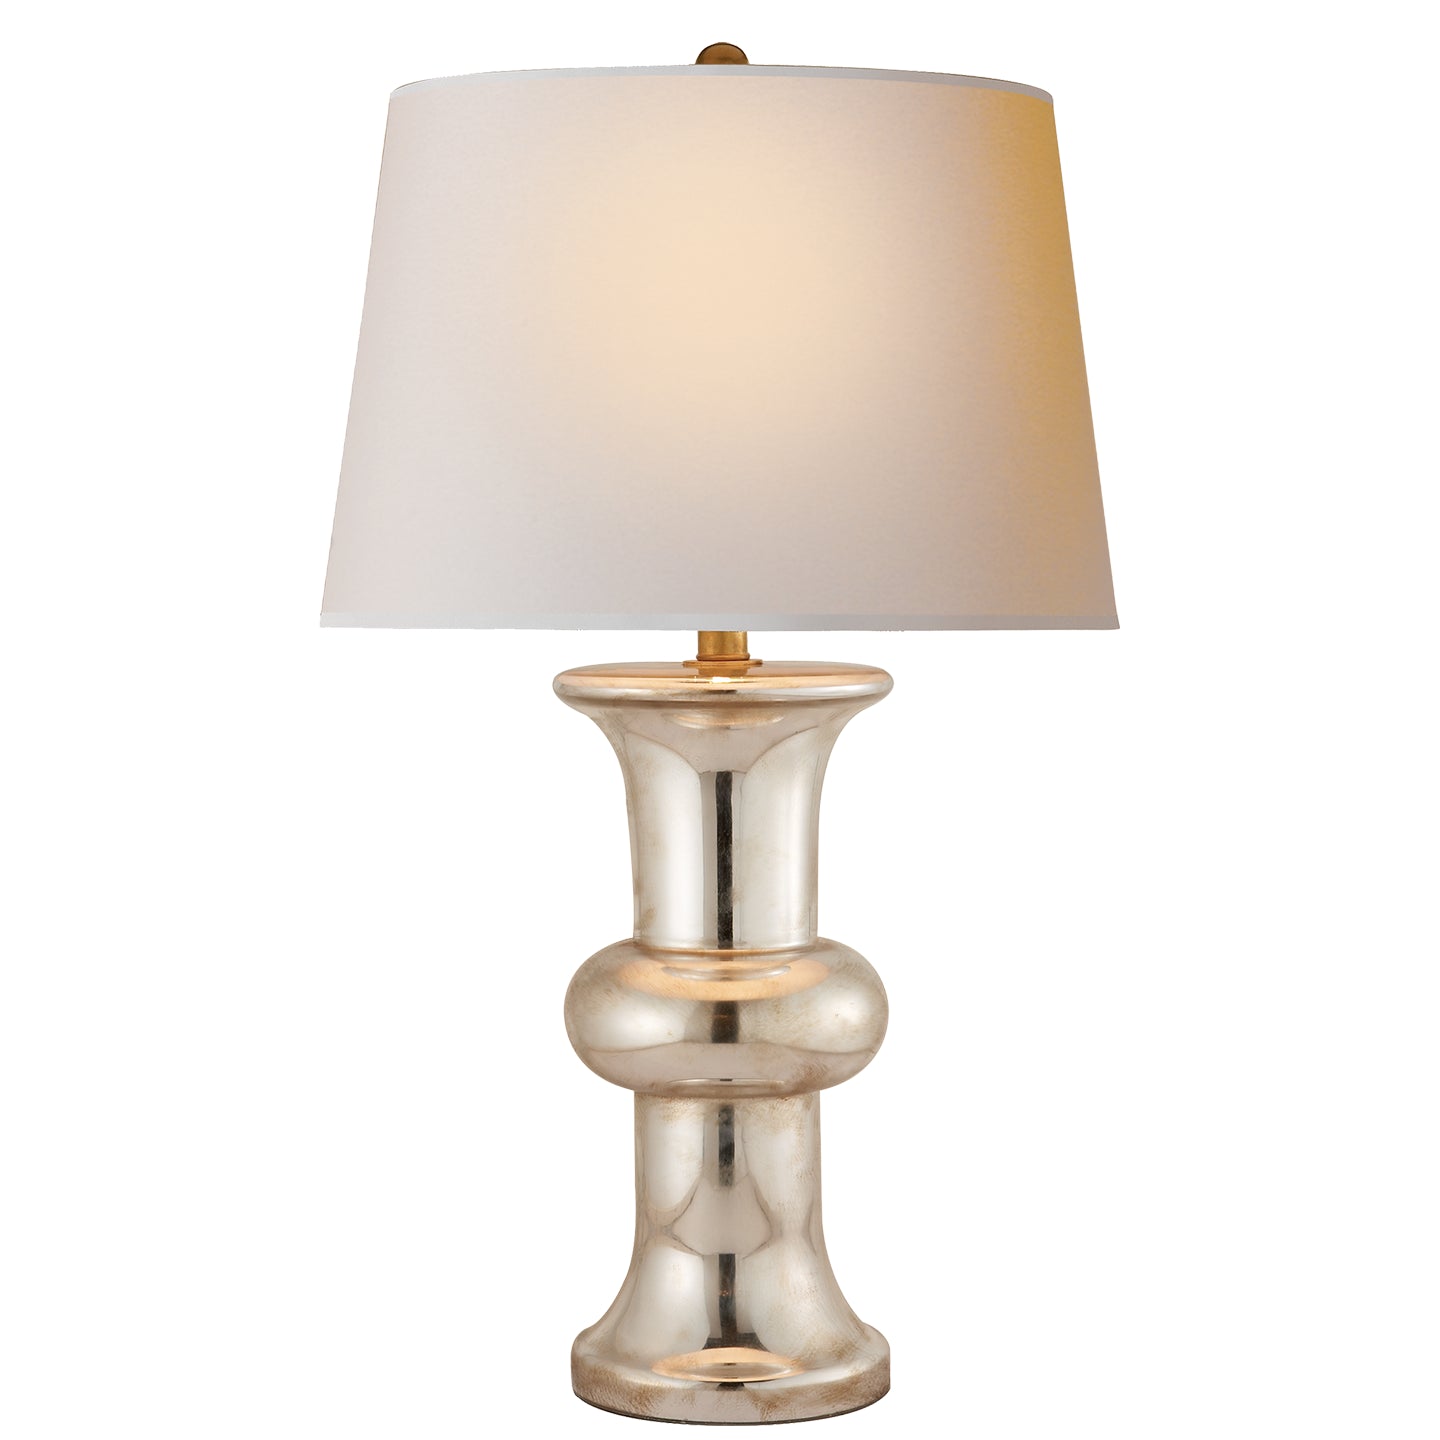 Load image into Gallery viewer, Visual Comfort Signature - SL 3845MG-NP - One Light Table Lamp - Bull Nose - Mercury Glass
